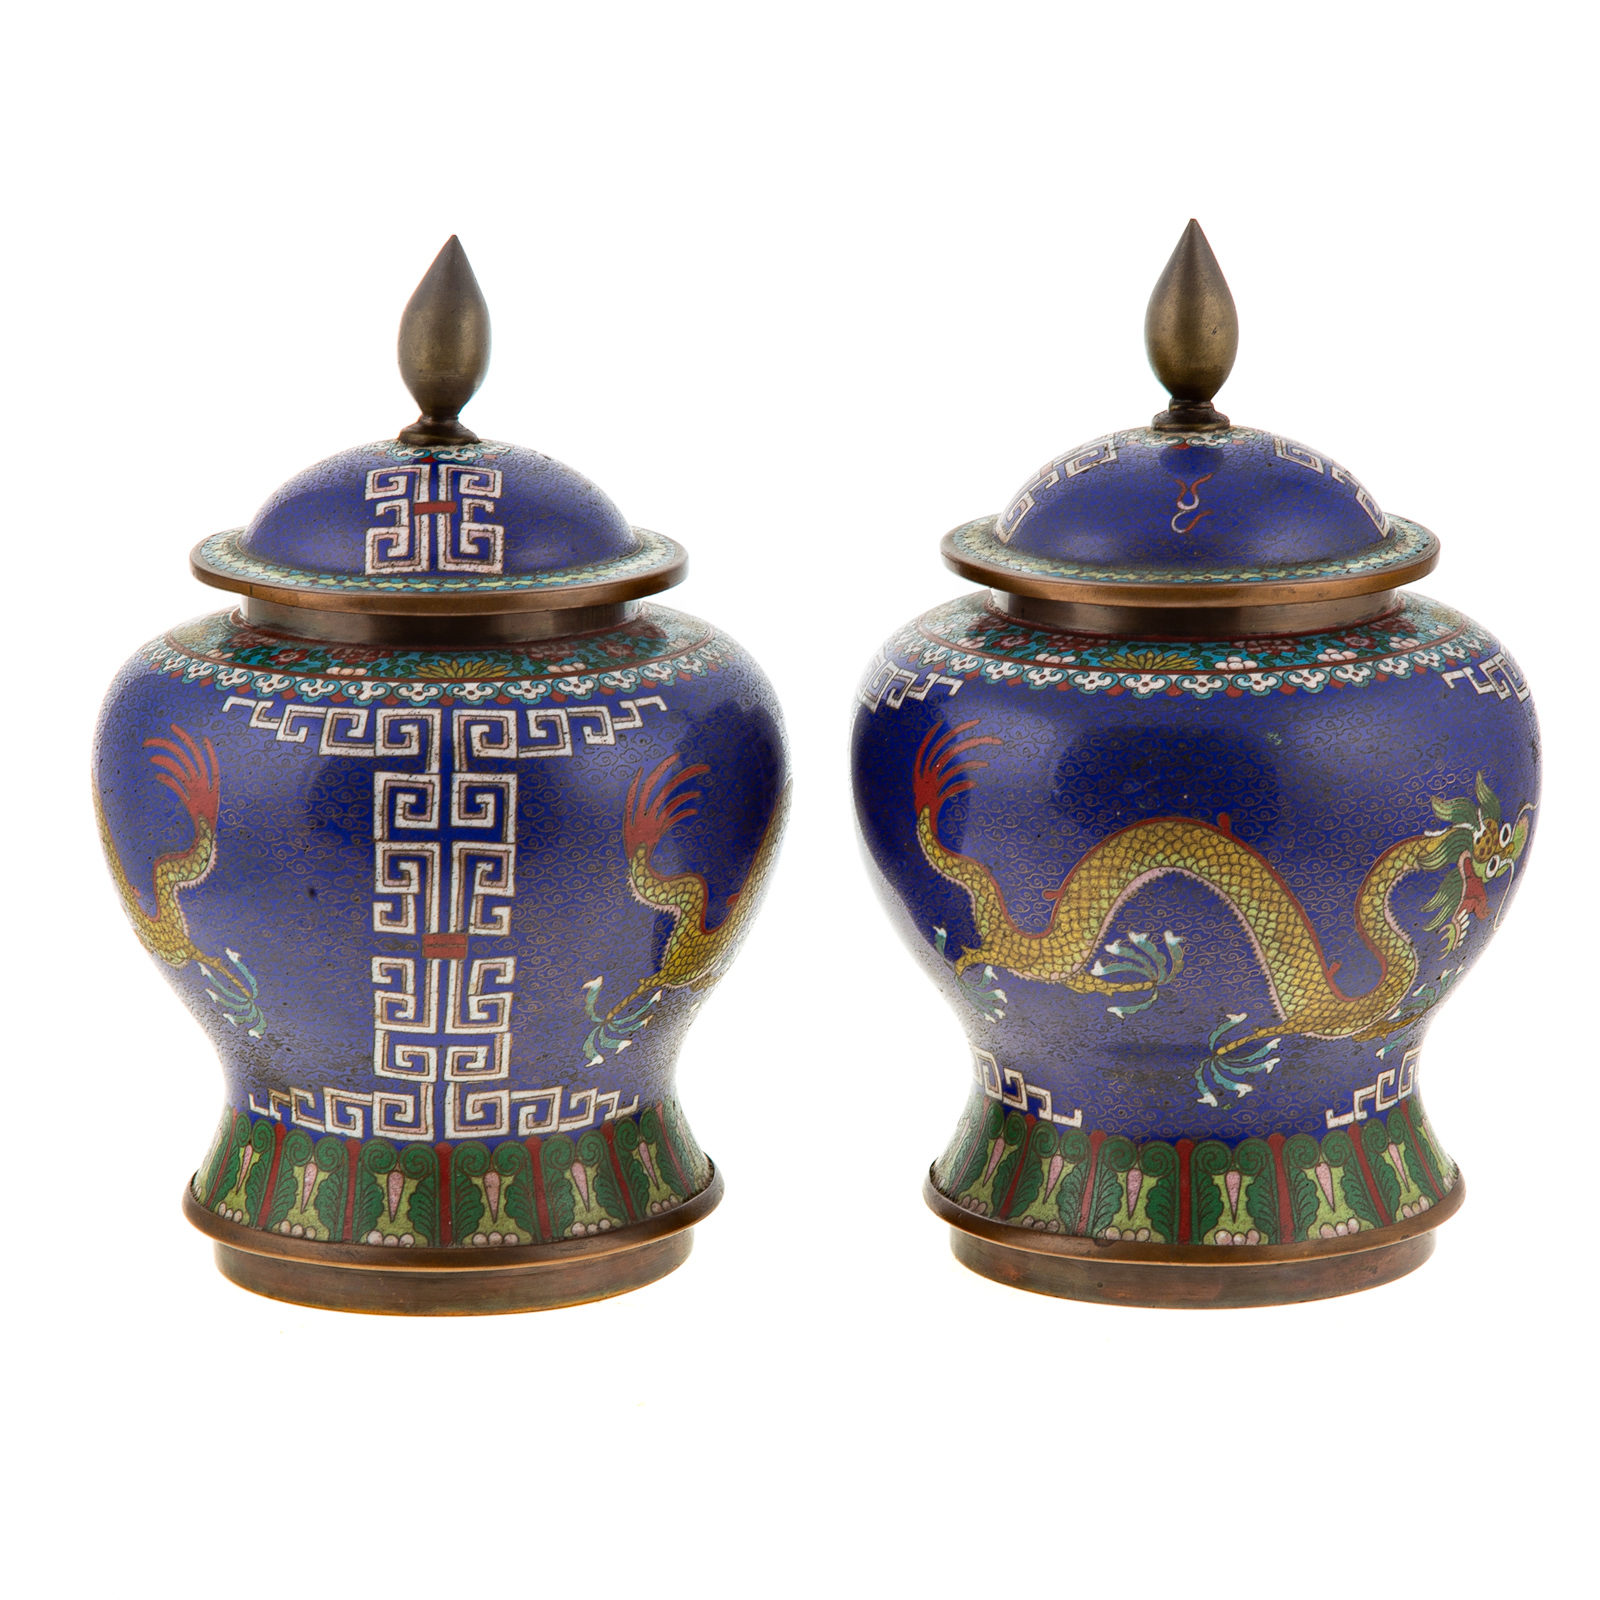 A PAIR OF CHINESE CLOISONNE ENAMEL 29ded1